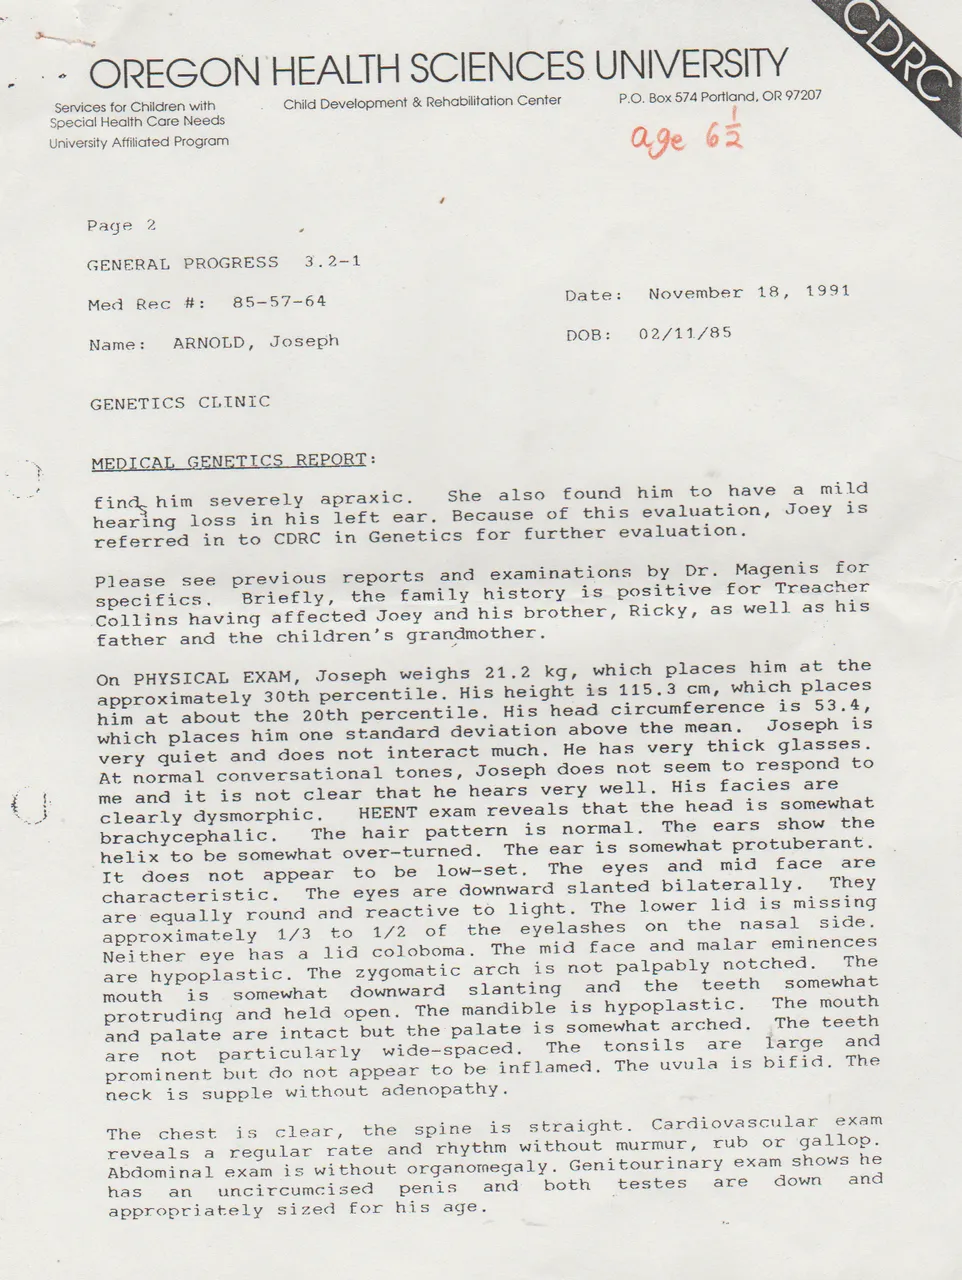 1991-11-18 - Monday - Evaluation of Joey Arnold by some MDs - Oregon Health Sciences University, Portland, OR - 4pages-2.png